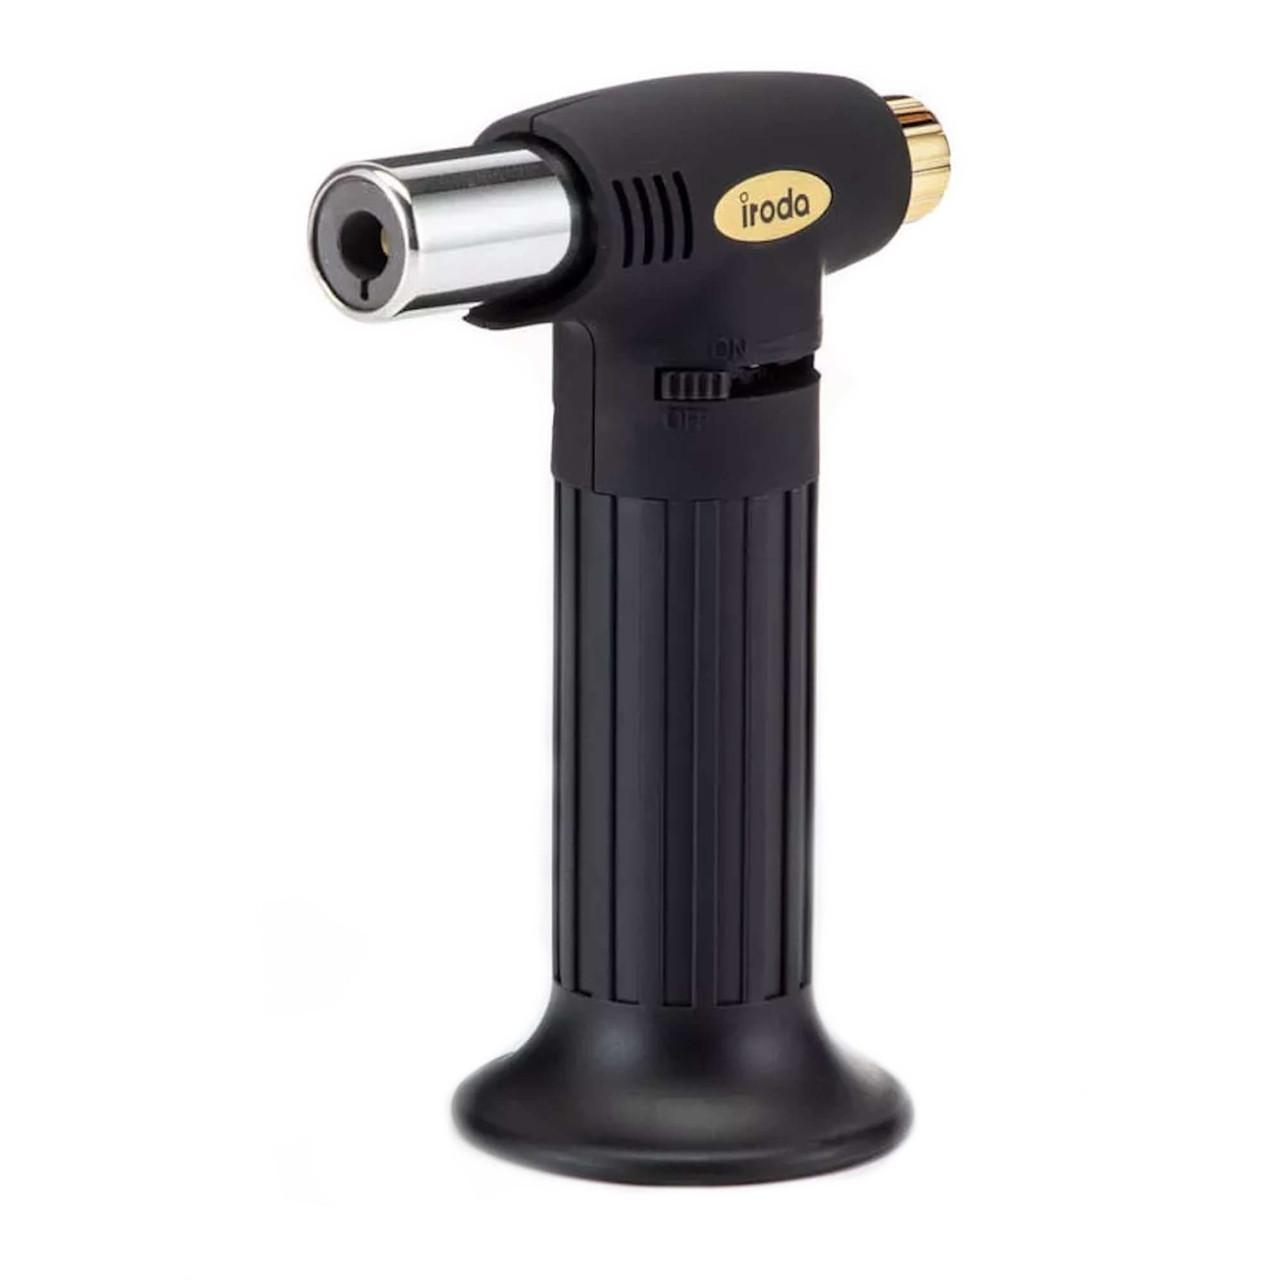 PT-200 Black "Luxury" Torch with Rubberized handle for a better and softer feel.  Same PT-200 torch, same precision flame, same design!